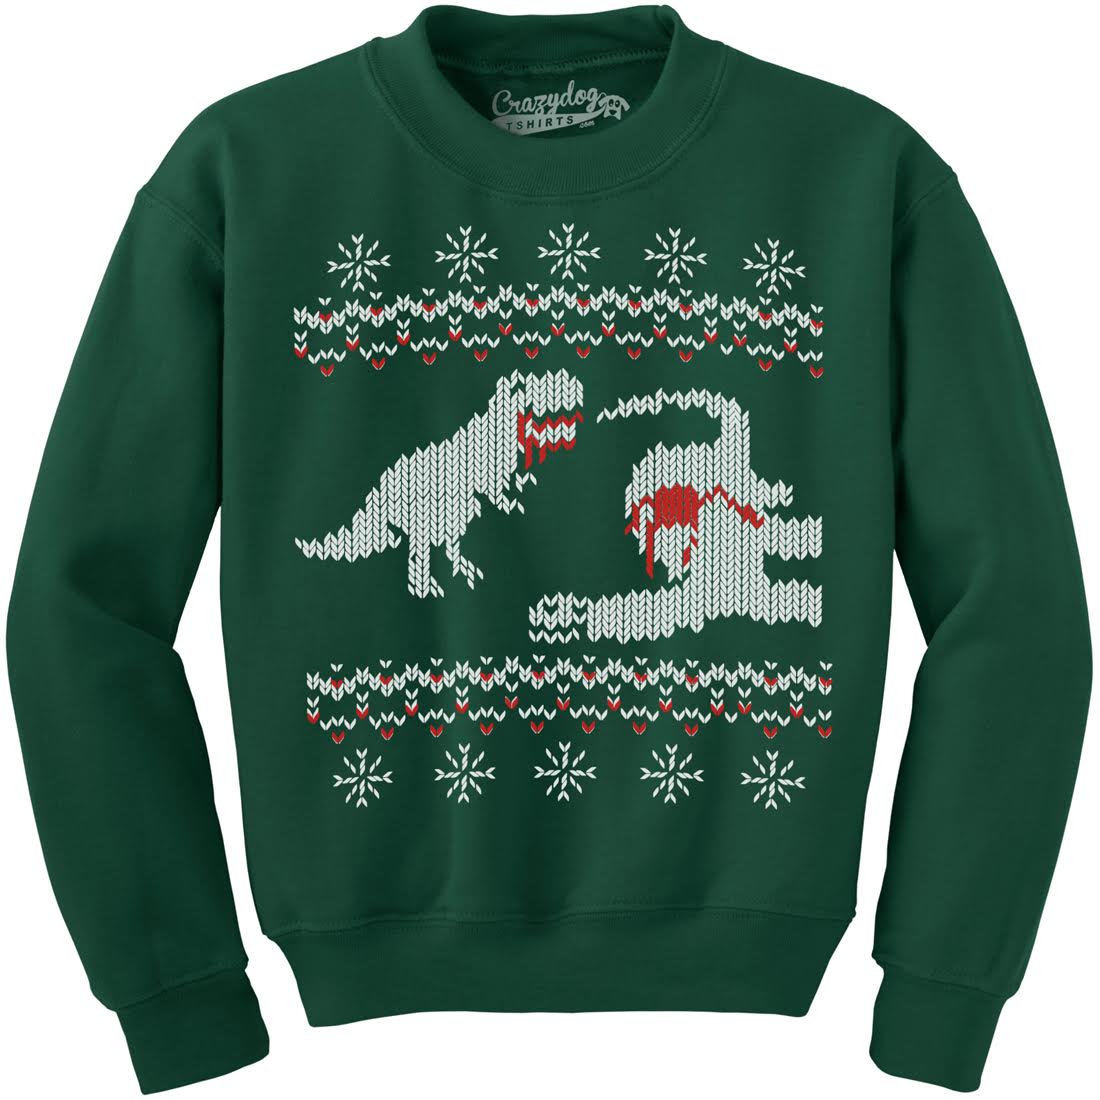 Funny Green Dinosaur Snack Funny Ugly Christmas Sweater Sweatshirt Nerdy Christmas Dinosaur Ugly Sweater Tee